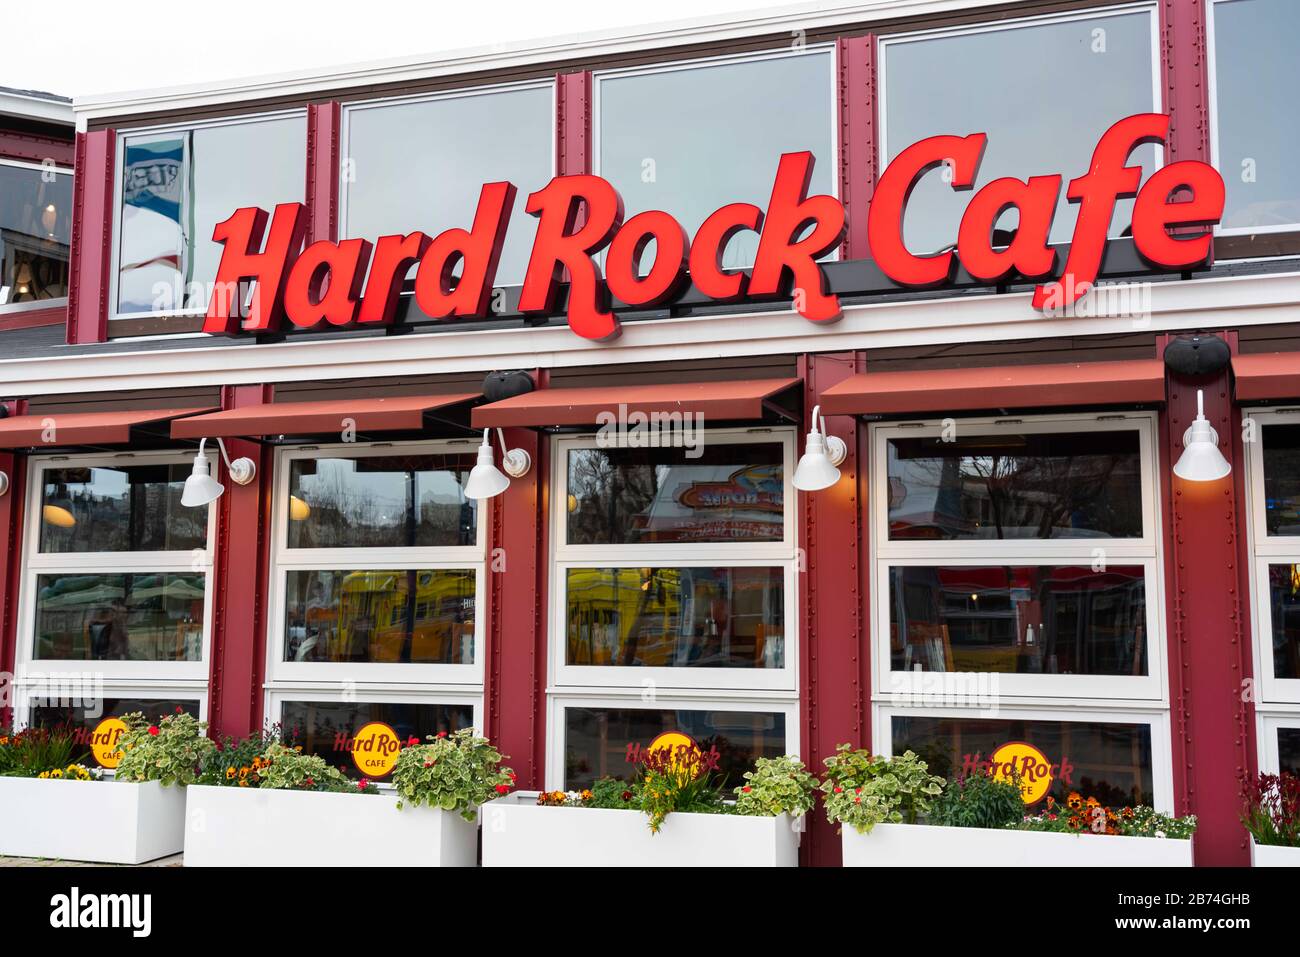 January 22, 2020, San Francisco, United States: American chain of theme restaurants Hard Rock Cafe seen at a restaurant. (Credit Image: © Alex Tai/SOPA Images via ZUMA Wire) Stock Photo